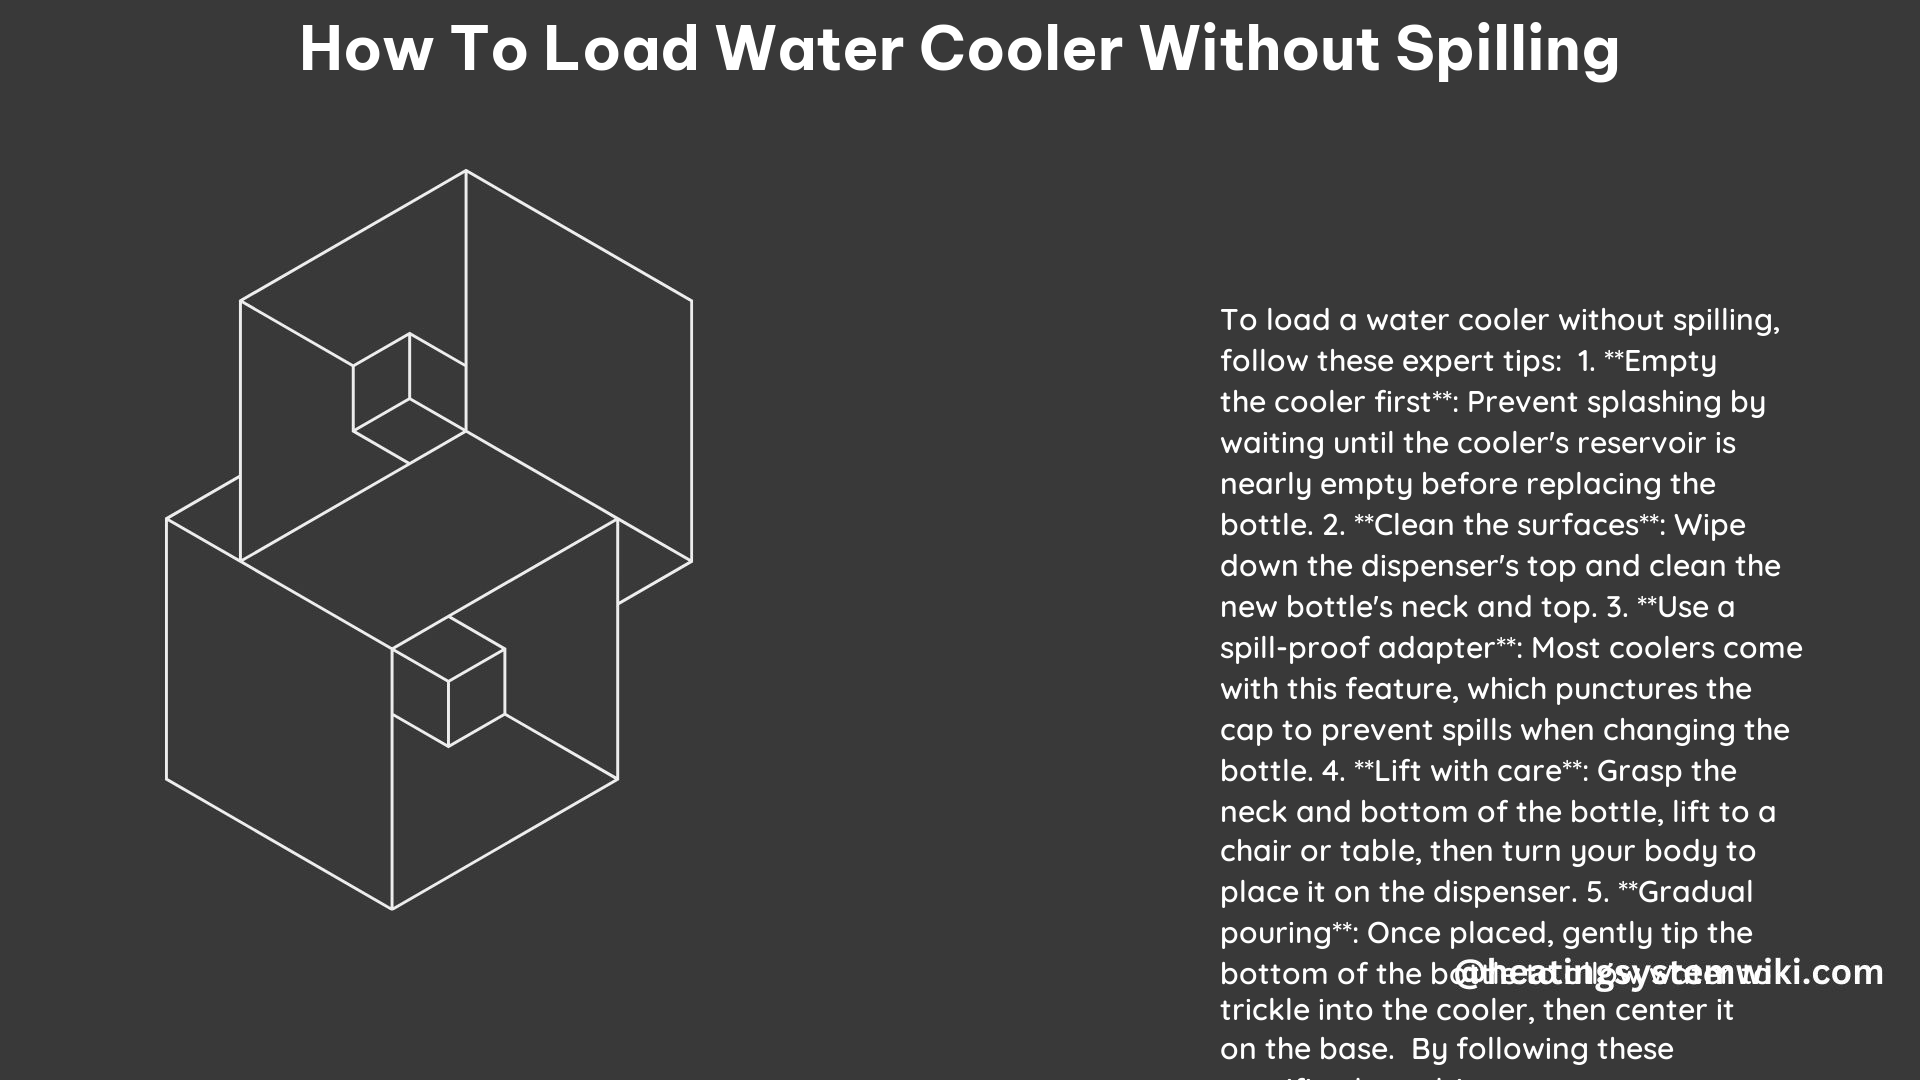 How to Load Water Cooler Without Spilling